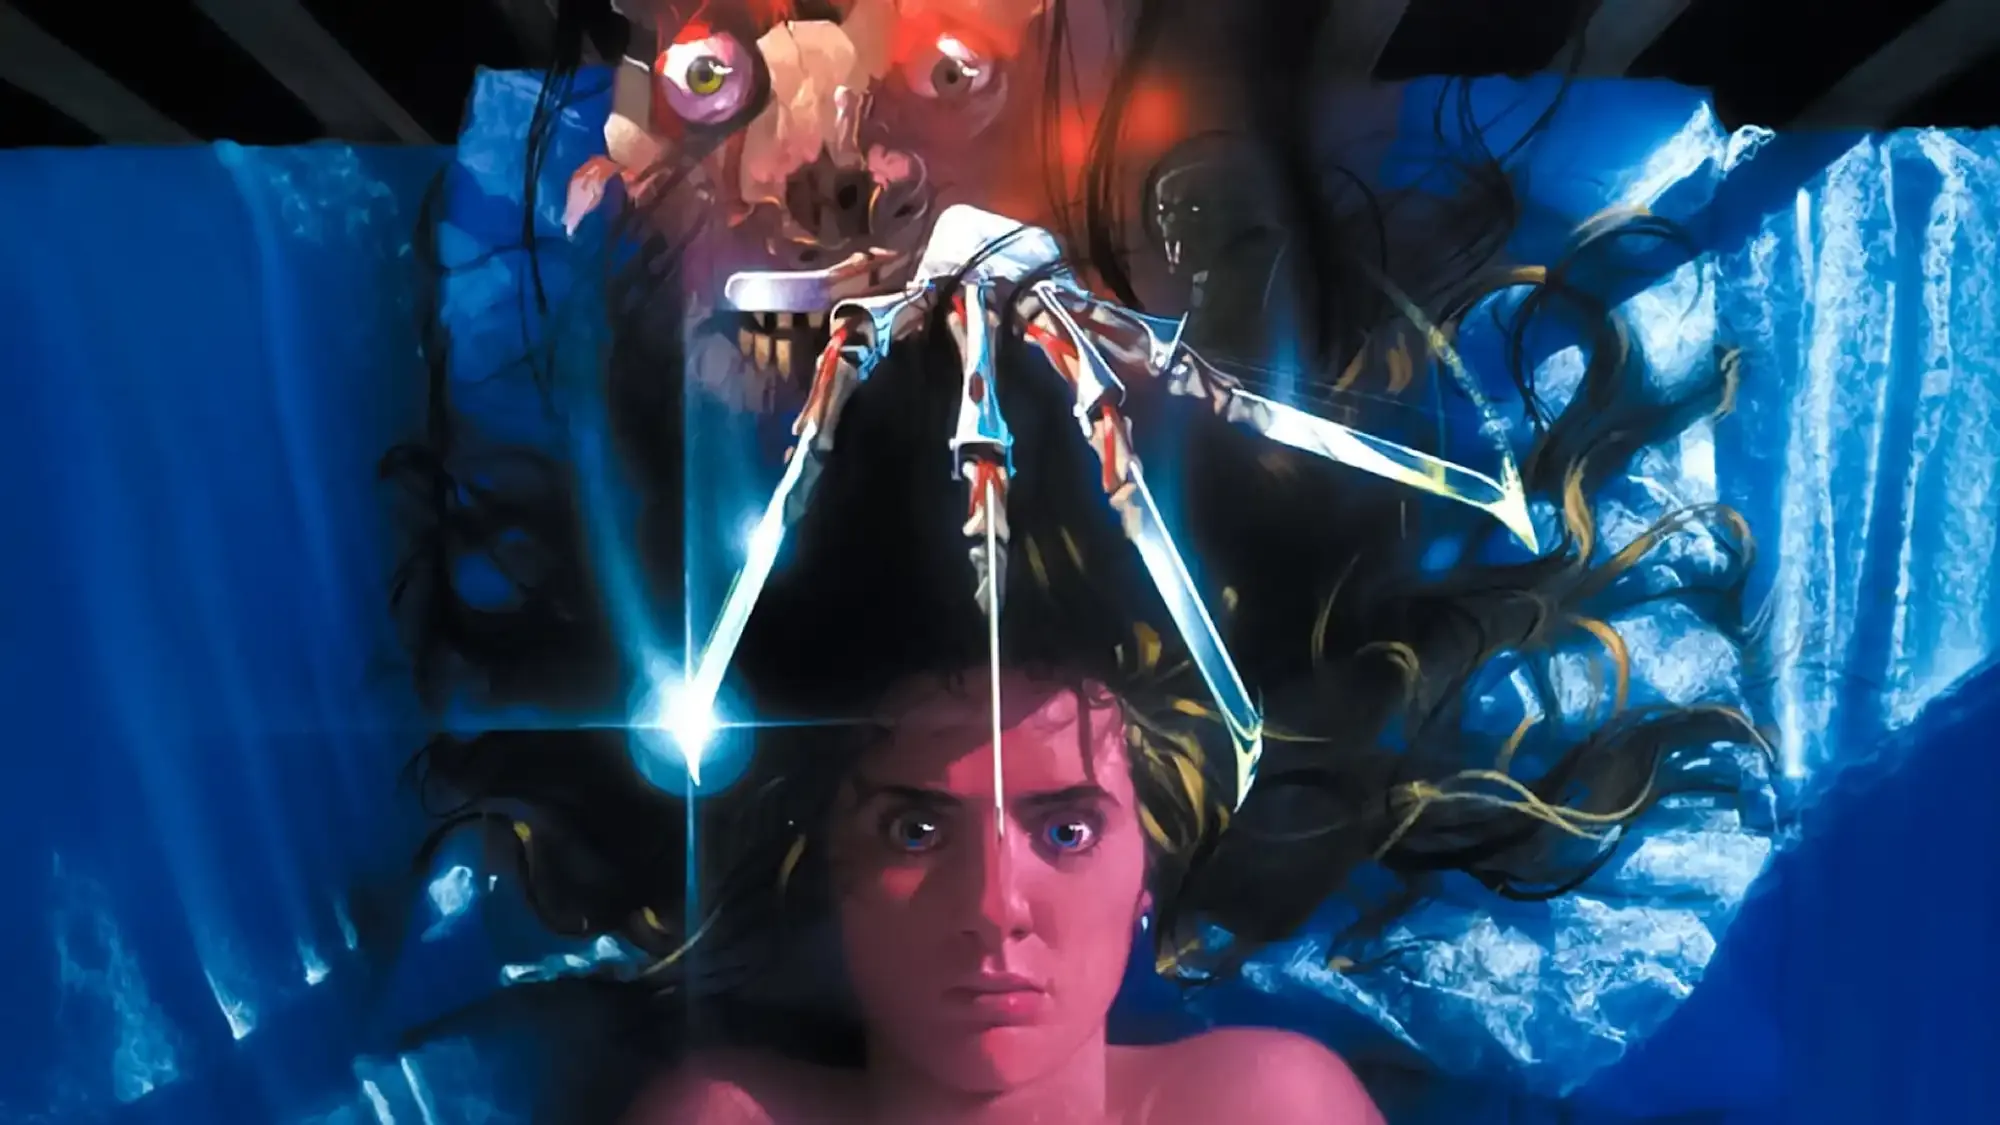 A Nightmare on Elm Street movie review